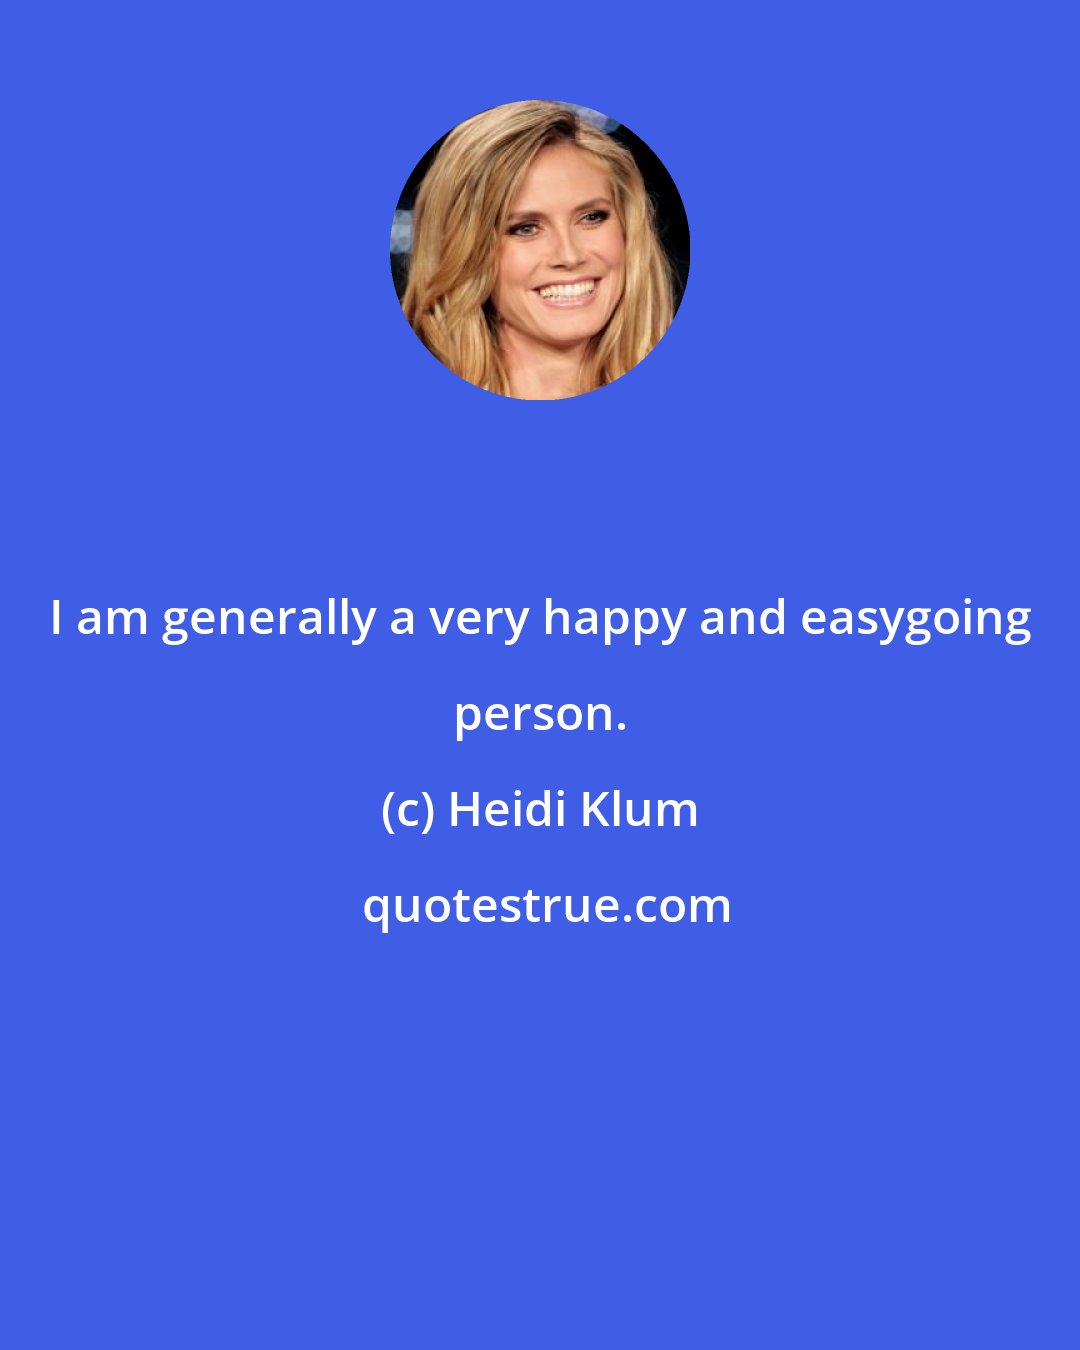 Heidi Klum: I am generally a very happy and easygoing person.